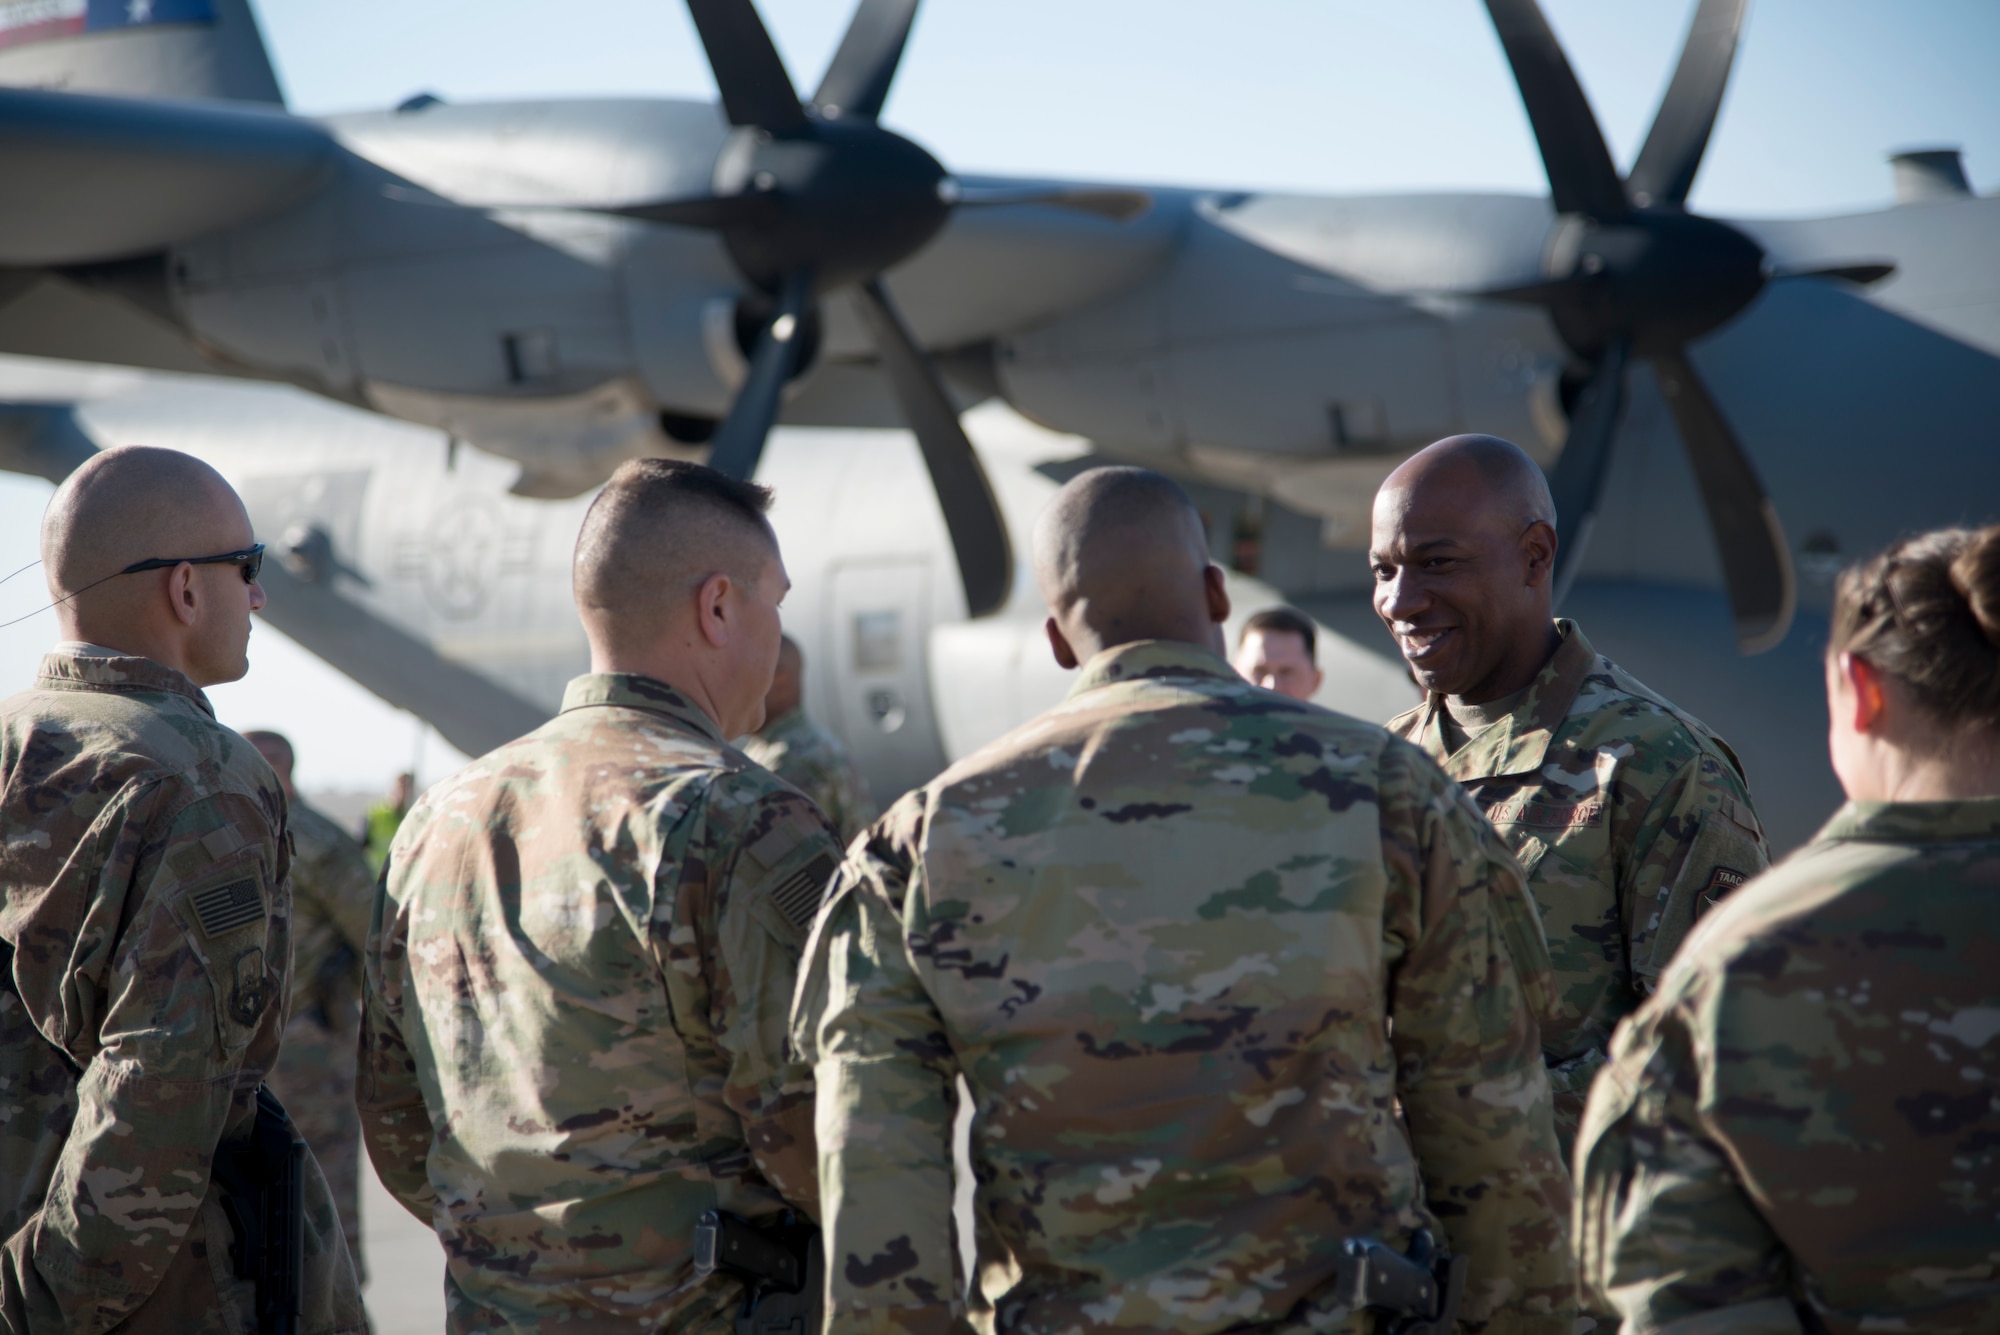 Chief Master Sgt. of the Air Force Kaleth O. Wright visits Airmen at Kandahar Airfield, Afghanistan, Dec. 24, 2018. During the visit, Wright met with different squadrons before speaking to Airmen at an all call with Air Force Chief of Staff Gen. David. L. Goldfein. (U.S. Air Force photo by Senior Airman Rito Smith)